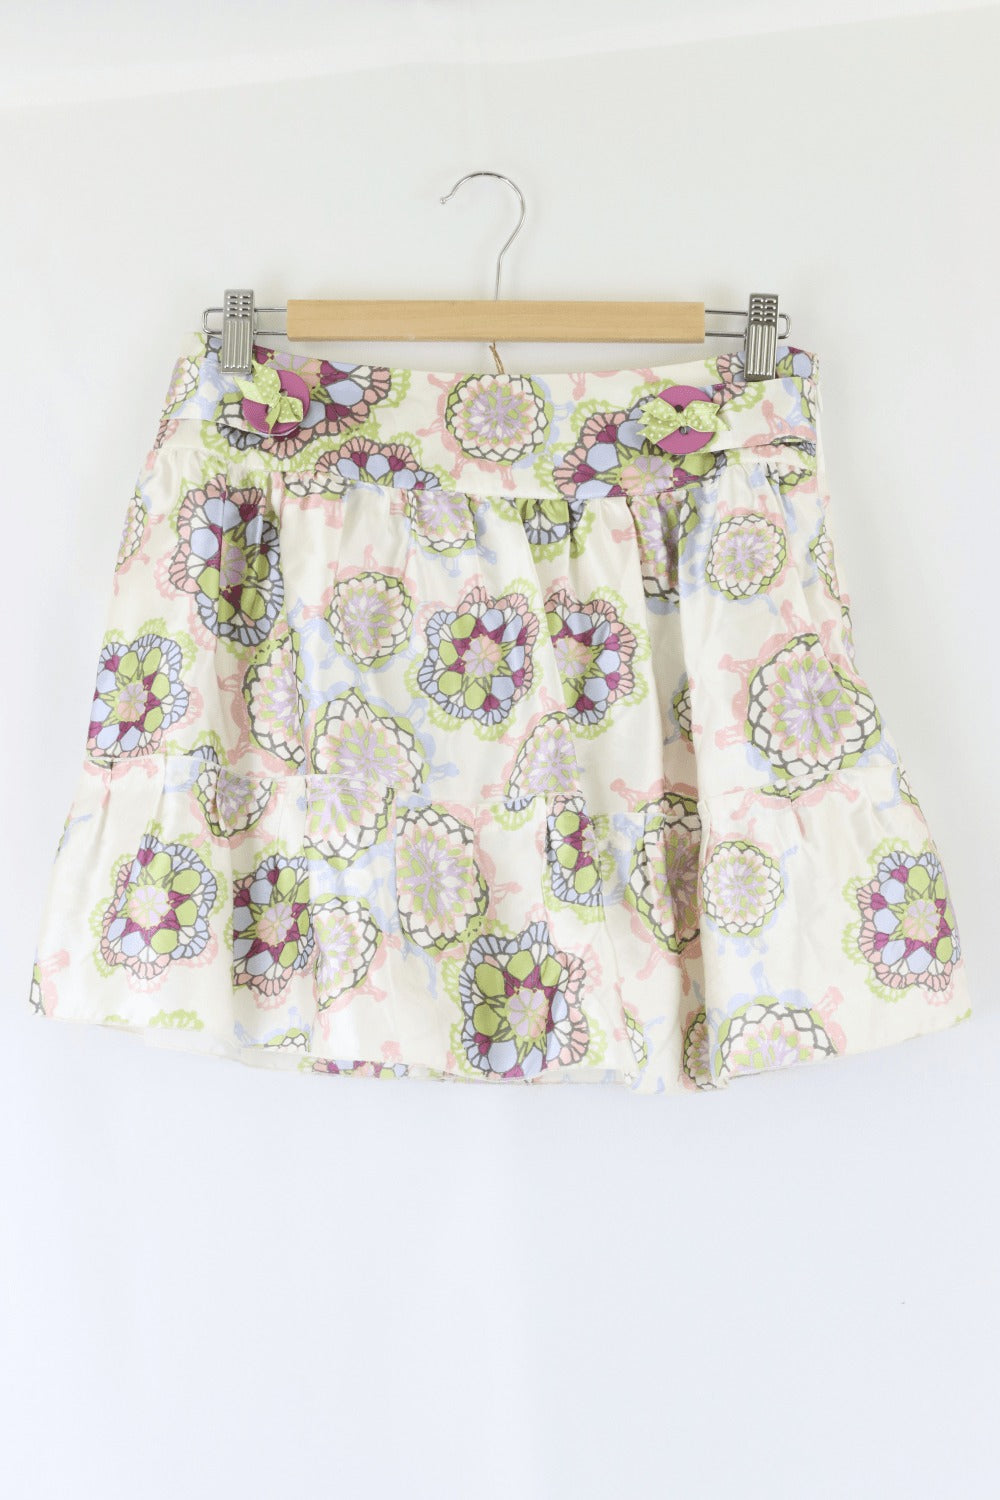 Alannah Hill Floral Skirt Green And Purple 8